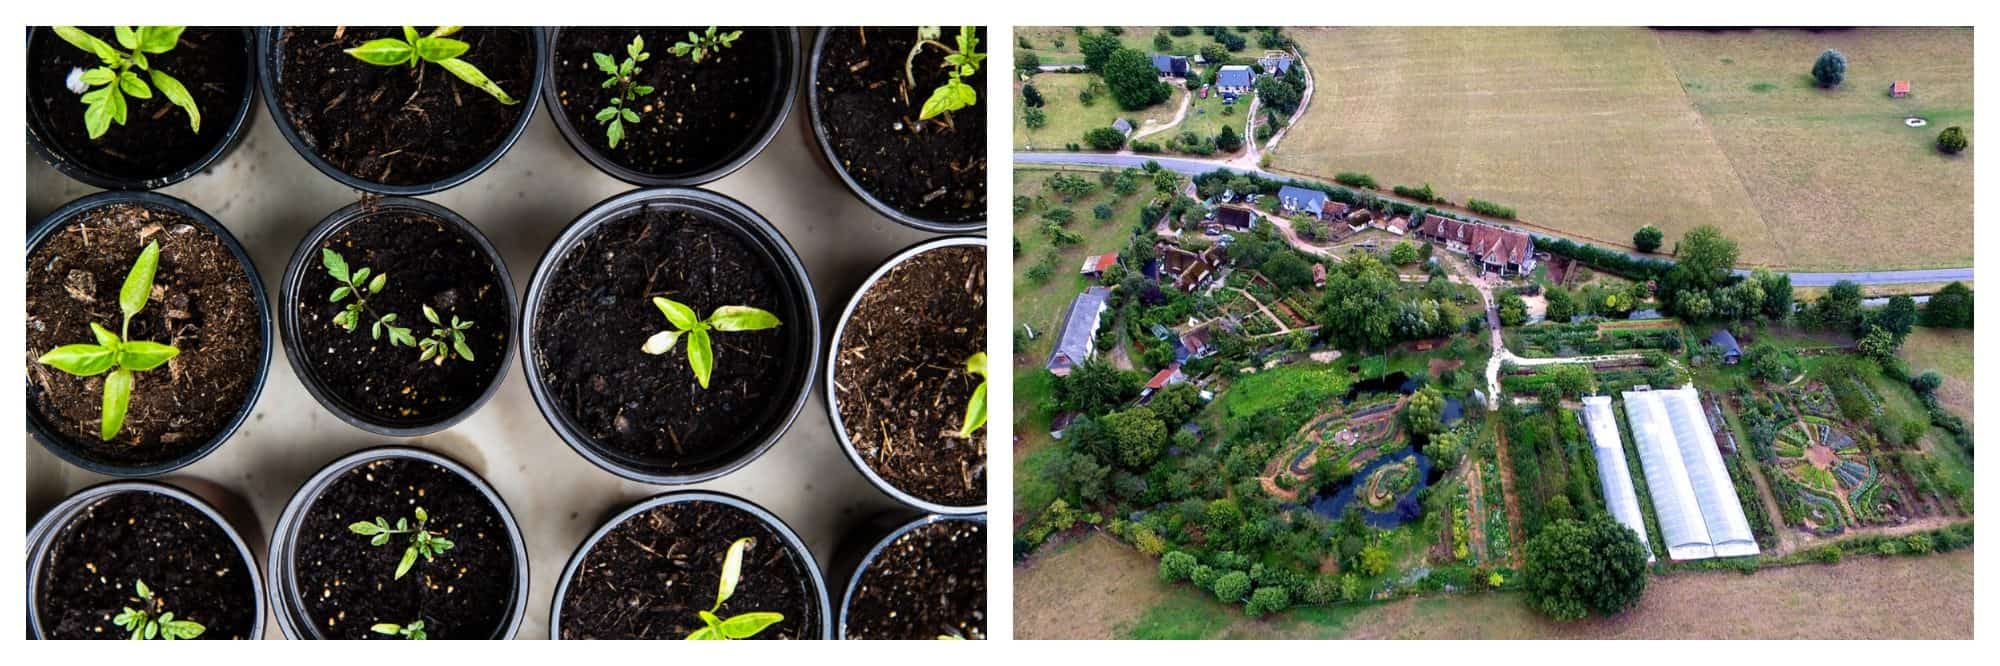 Seedlings being prepared for permaculture (left), like on this farm in France (right).